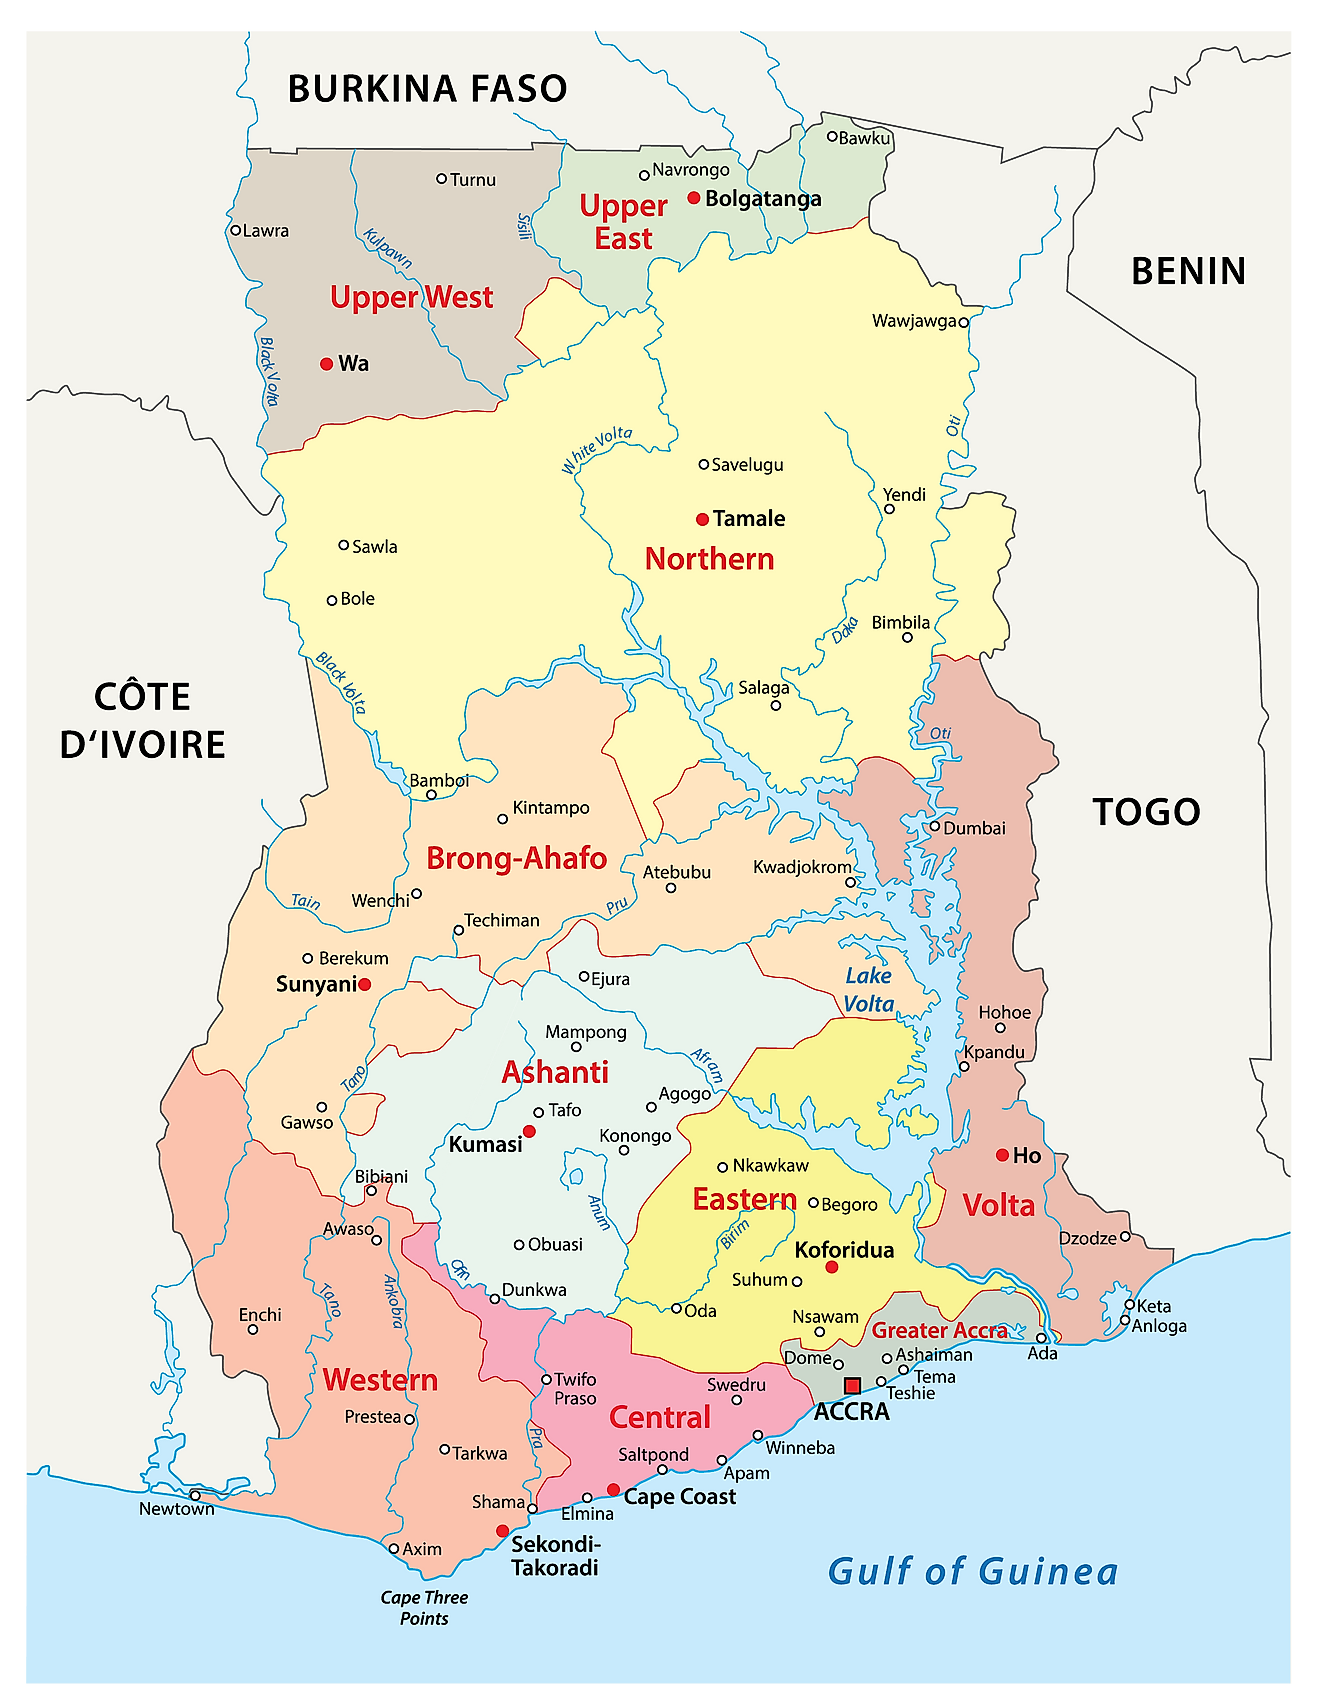 Political Map of Ghana showing the 16 regions and the national capital of Accra.